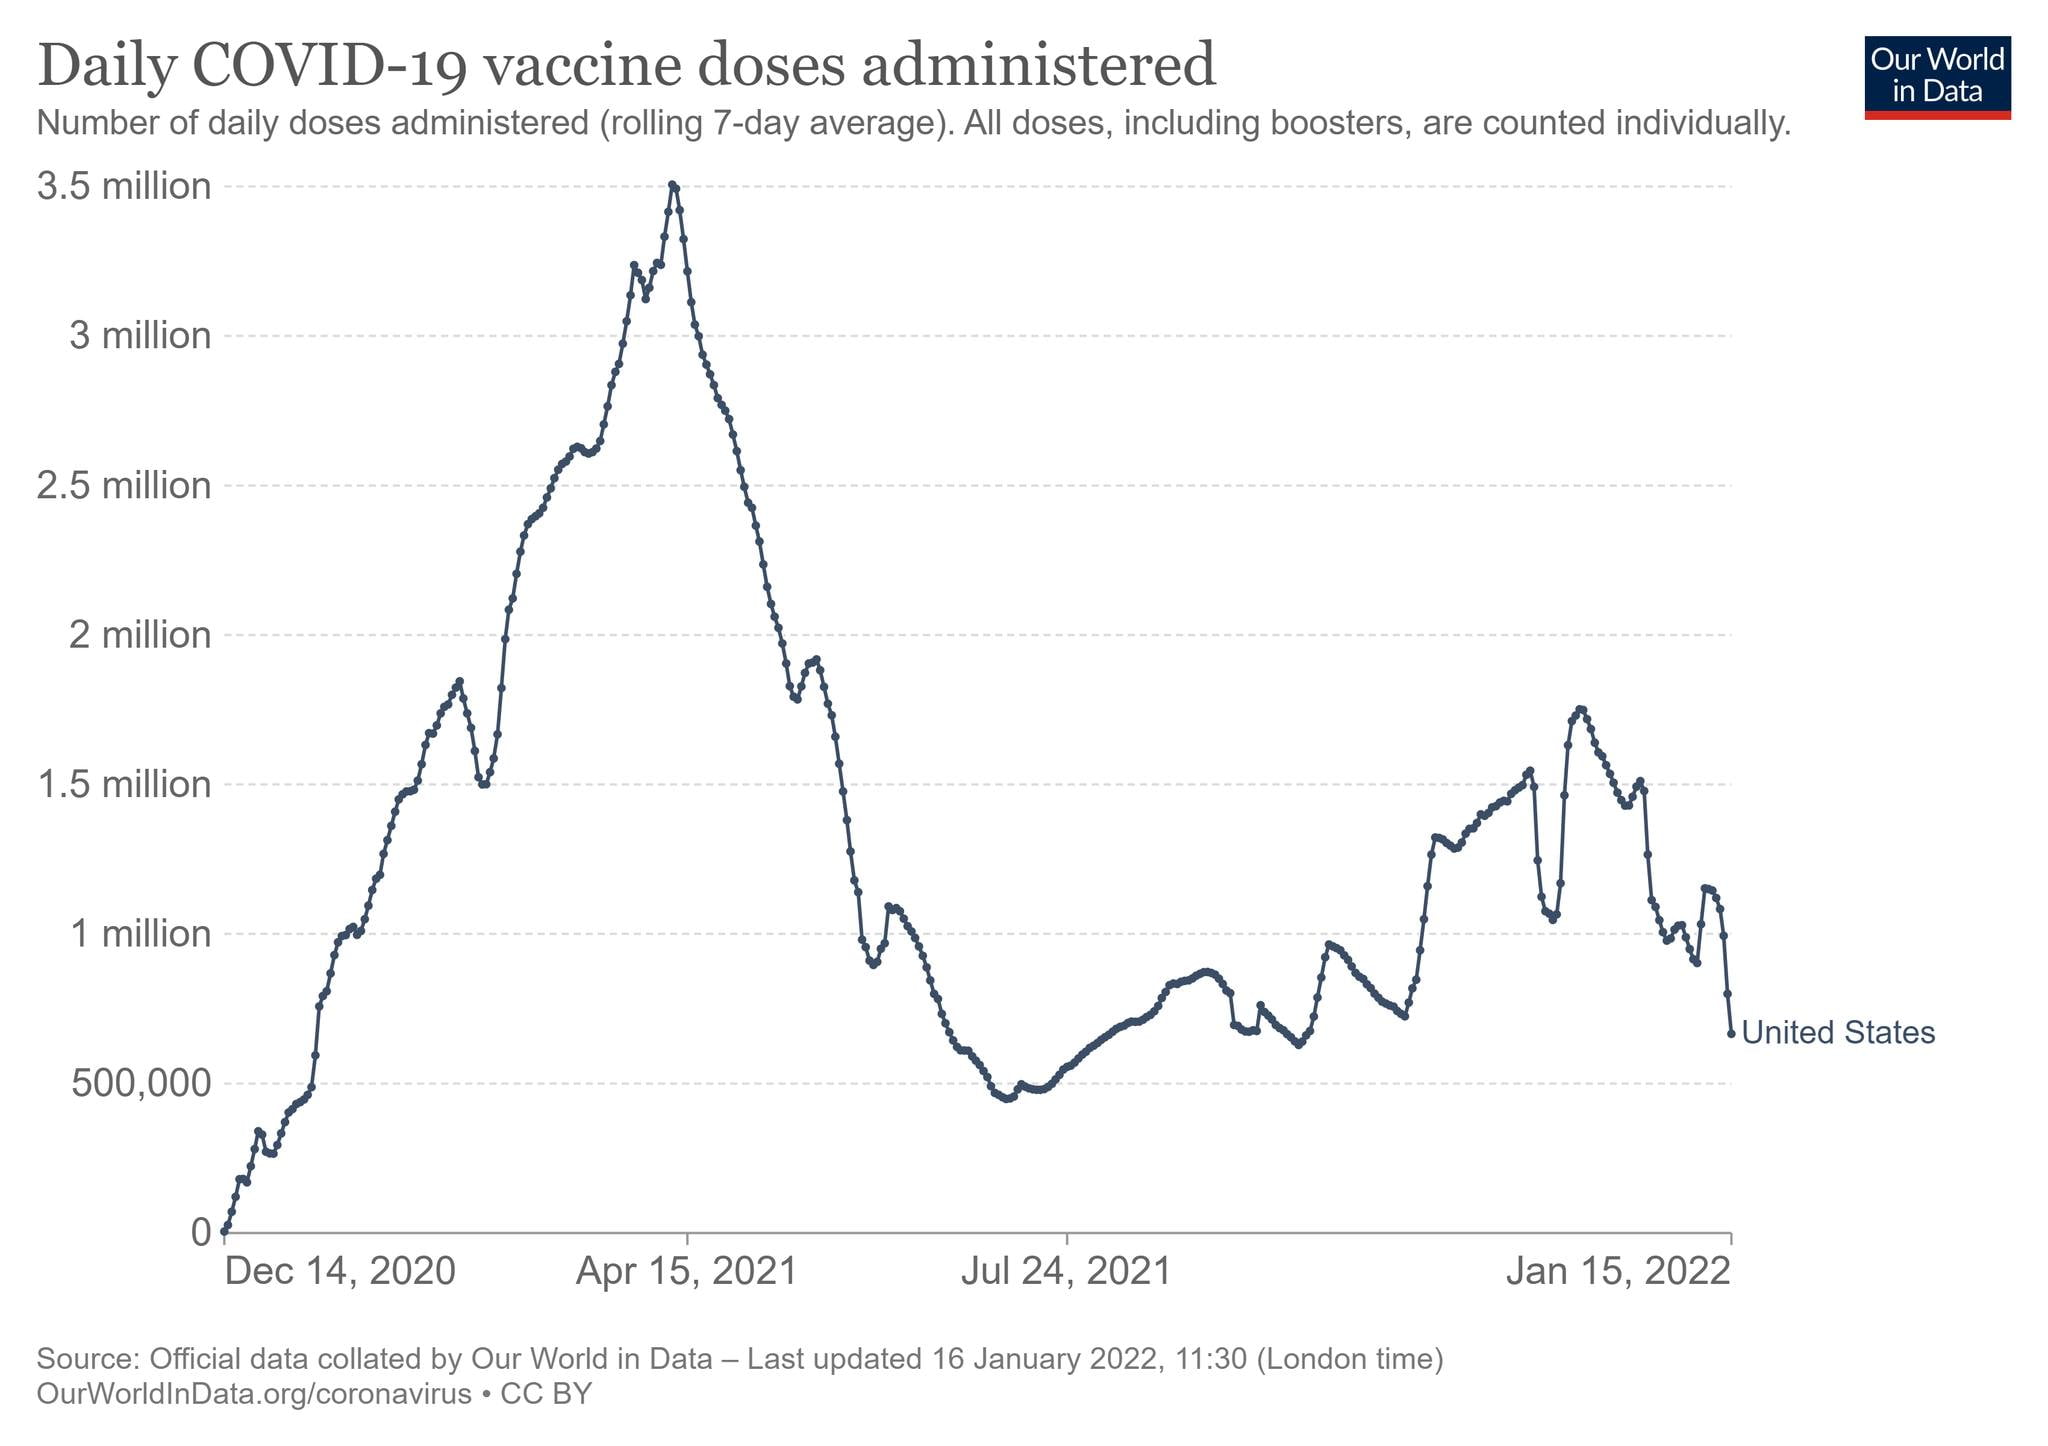 Vaccine doses administered now in freefall